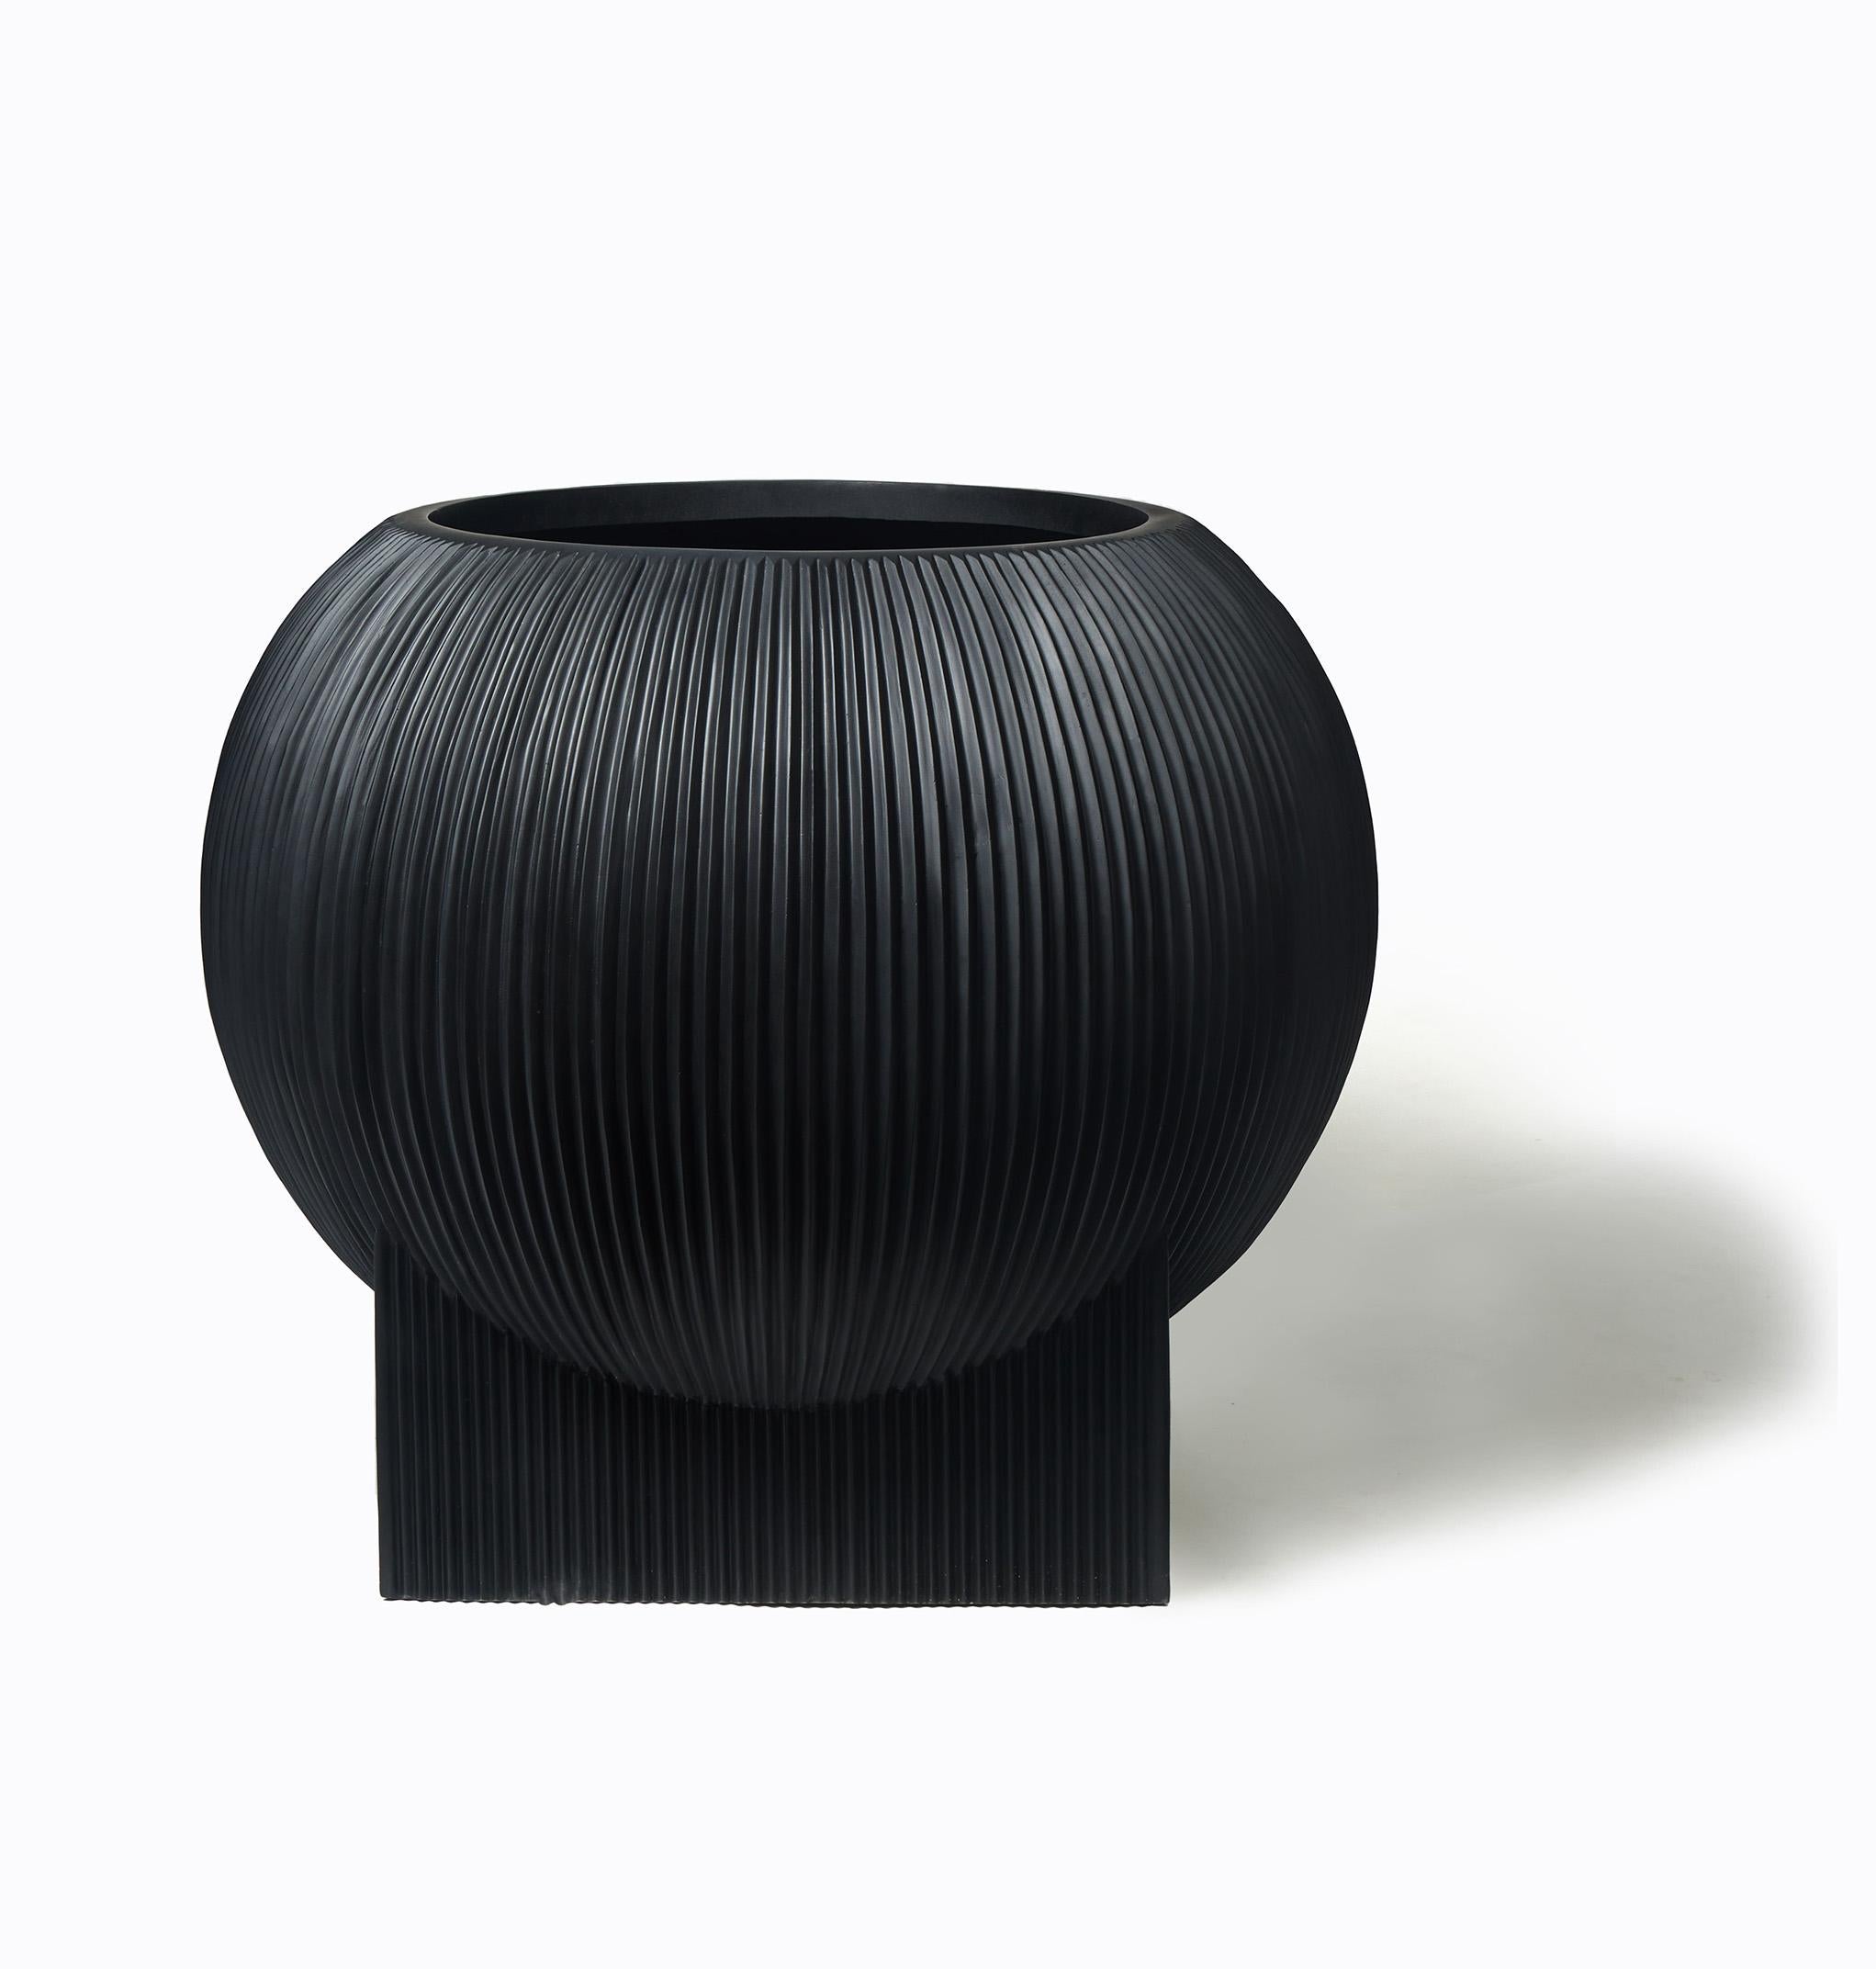 Modern Oversize Flat Blob Planter 'Black' by TFM, Represented by Tuleste Factory